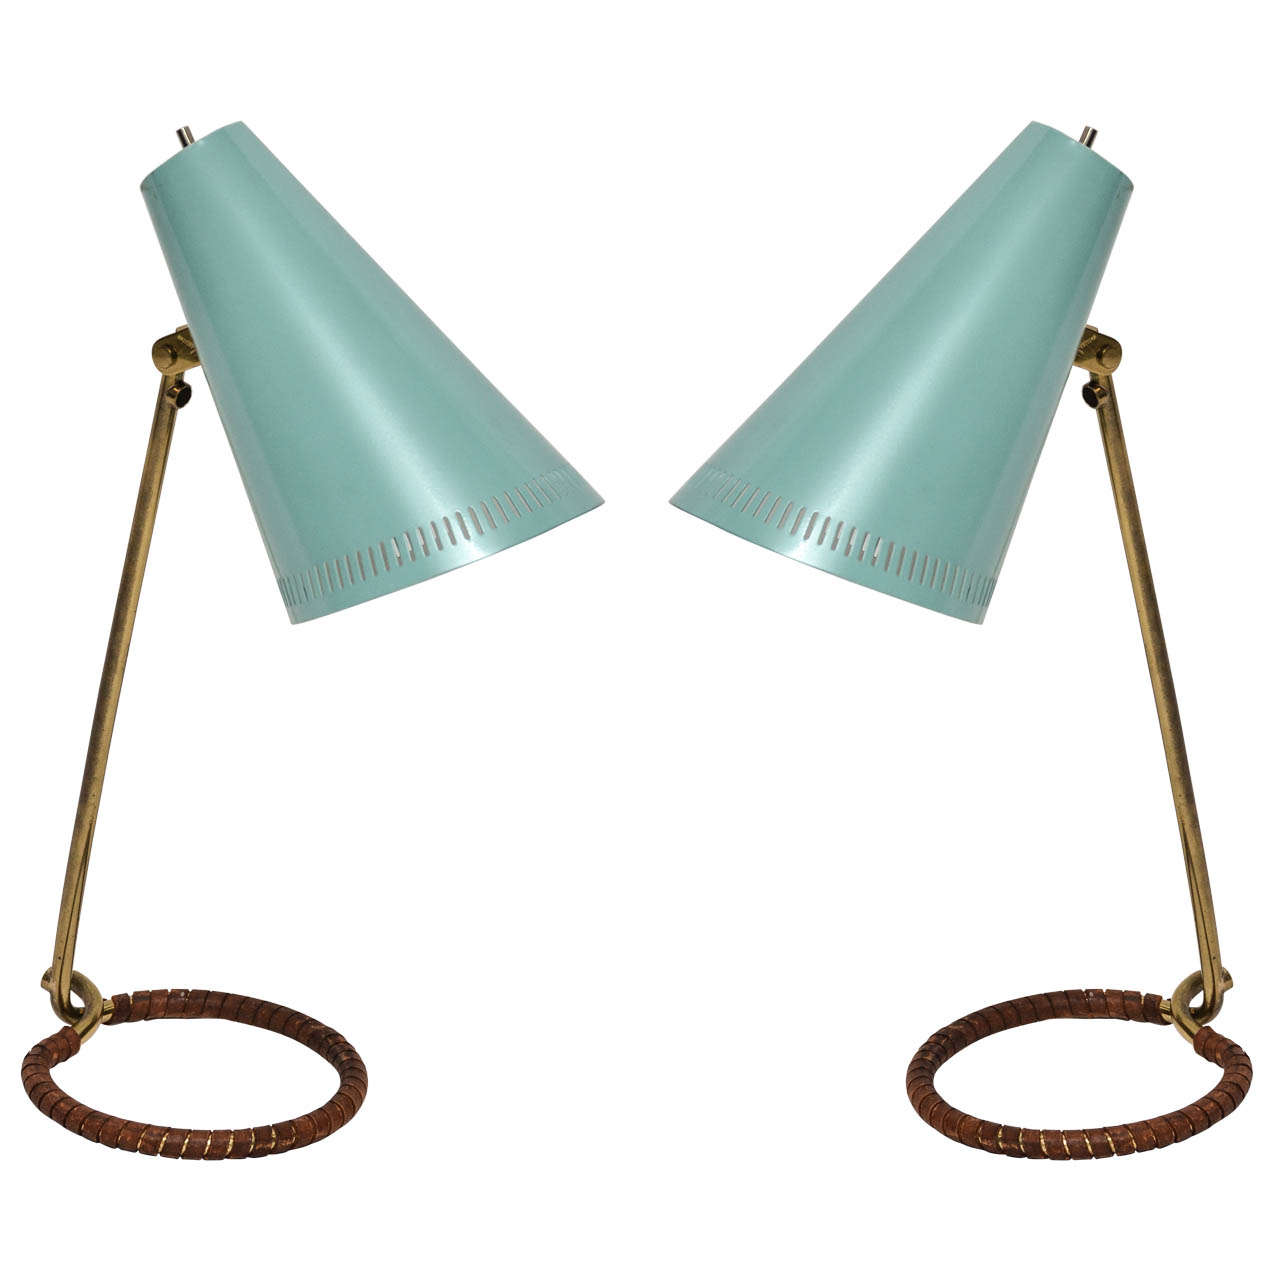 Pair of Idman Table Lamps in Brass with Turquoise-Hued Adjustable Helmet Shades